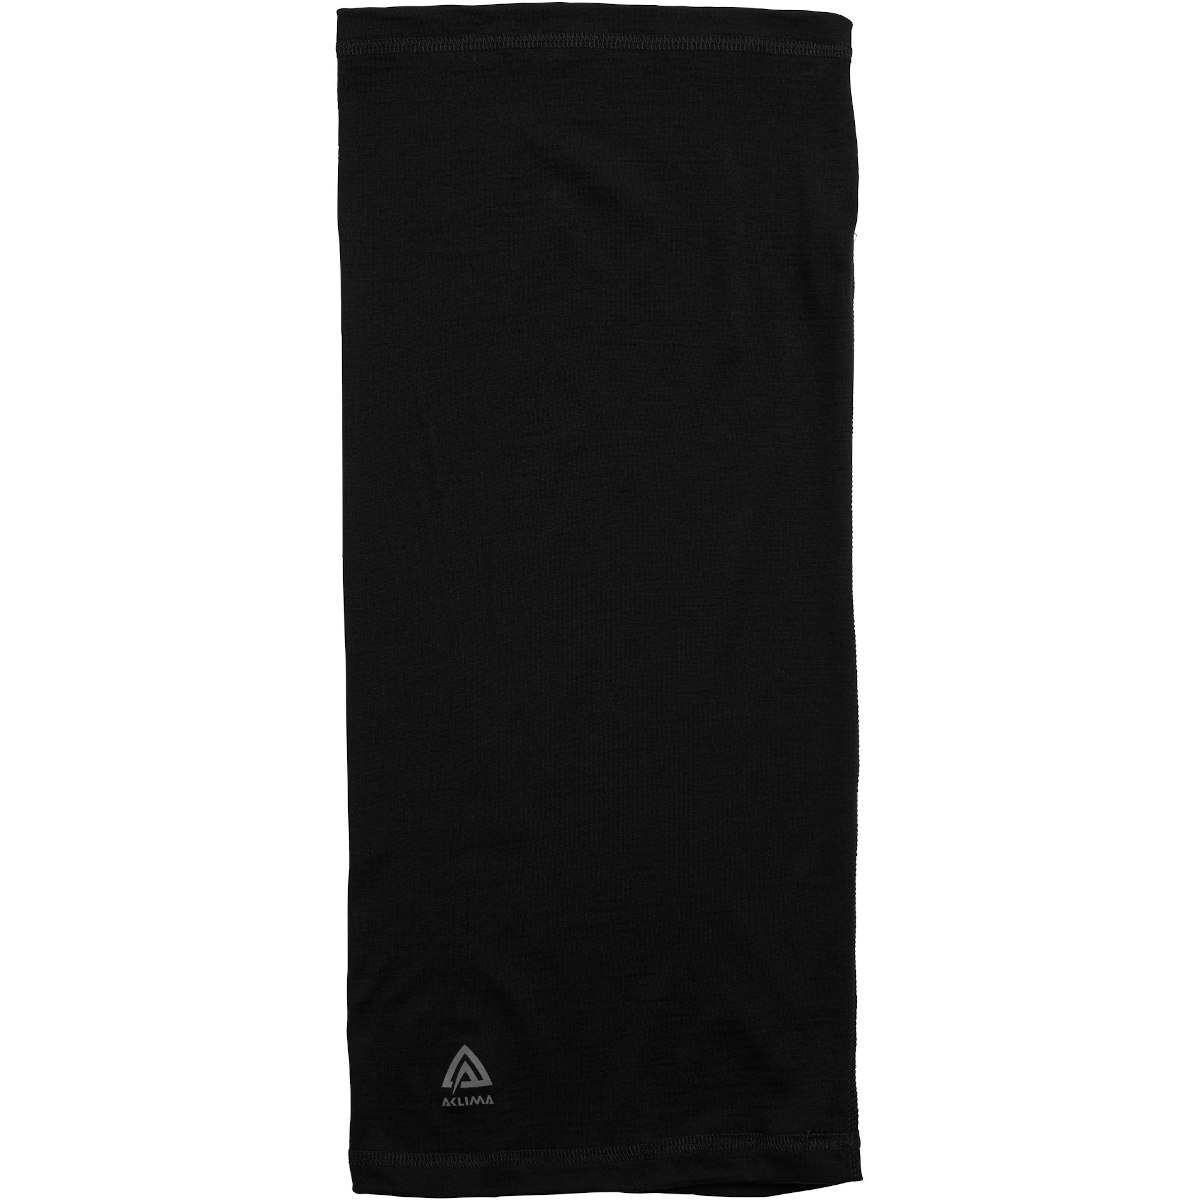 Picture of Aclima Lightwool Headover Multifunctional Cloth - jet black